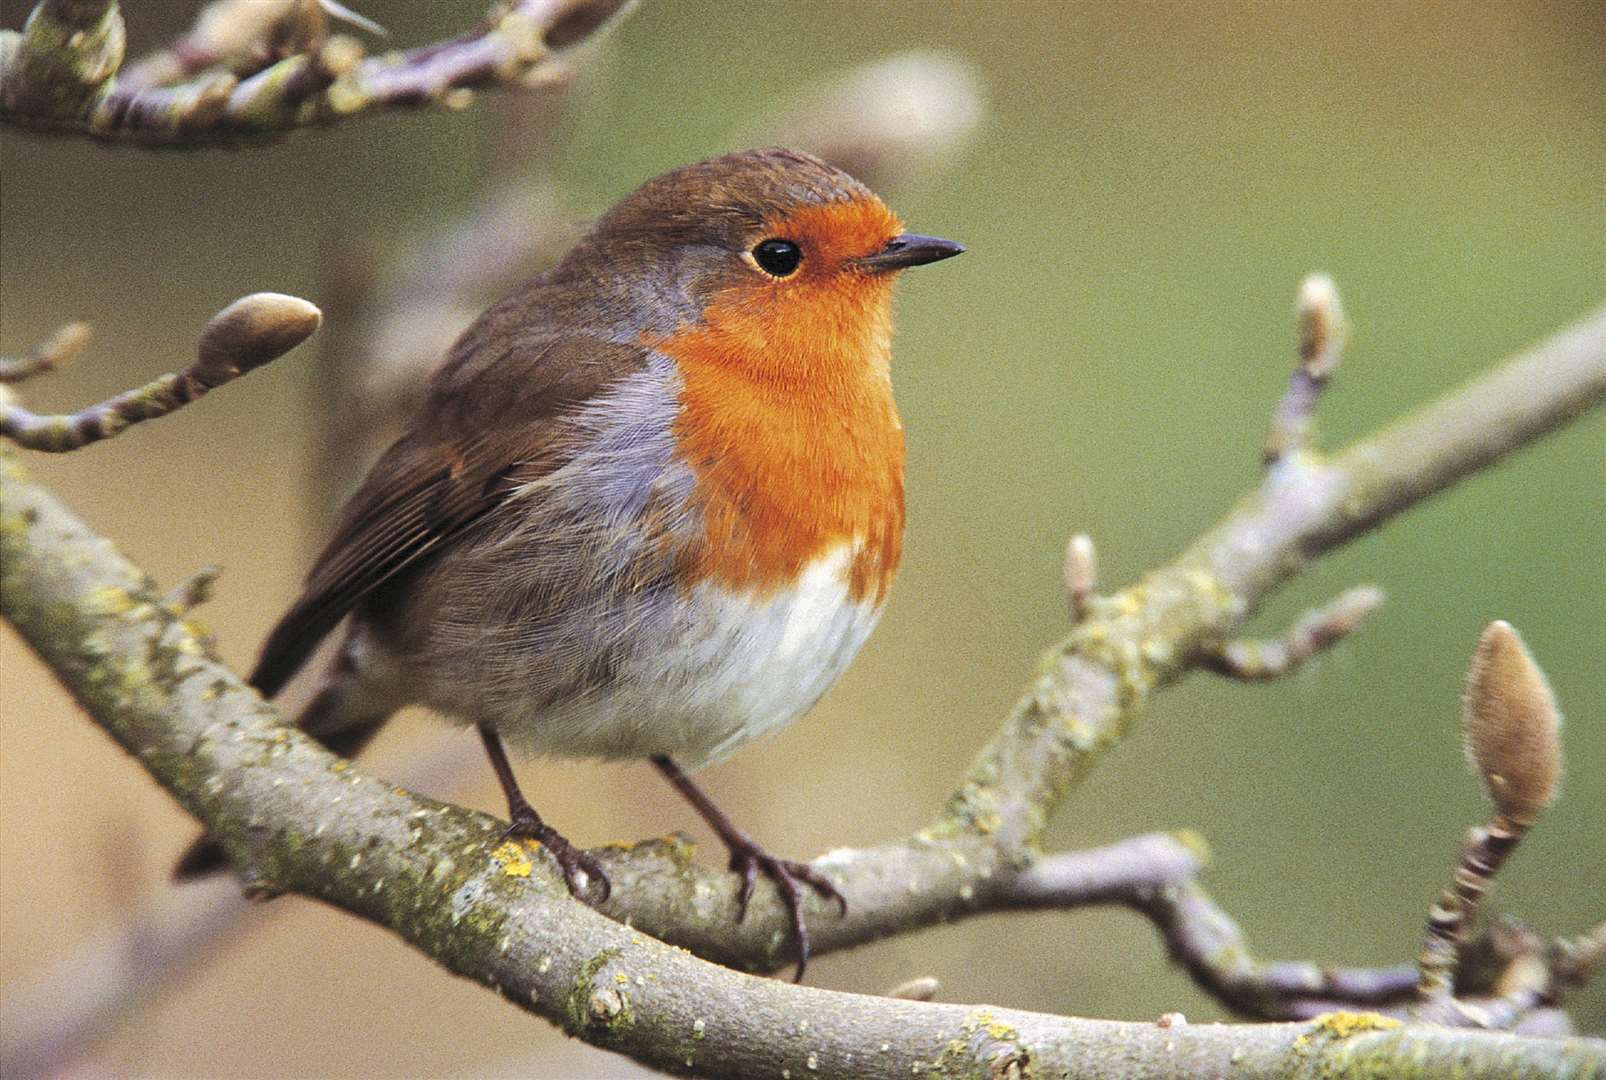 Every creature spotted will count, says the RSPB, in helping it understand populations